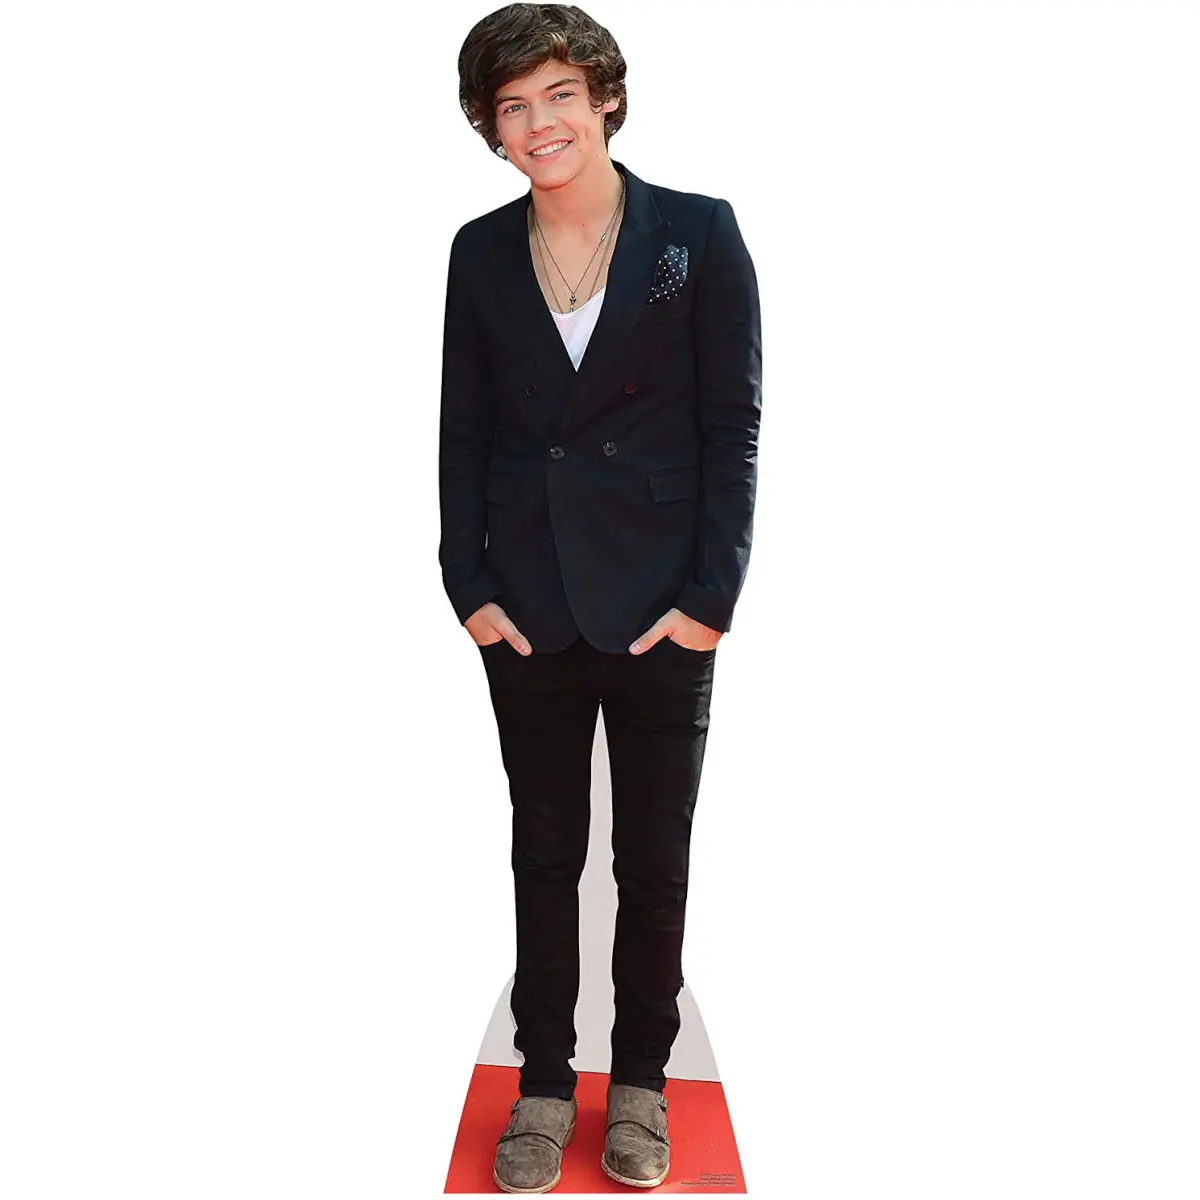 CS573 Harry Styles One Direction English Singer Songwriter Lifesize Cardboard Cutout Standee